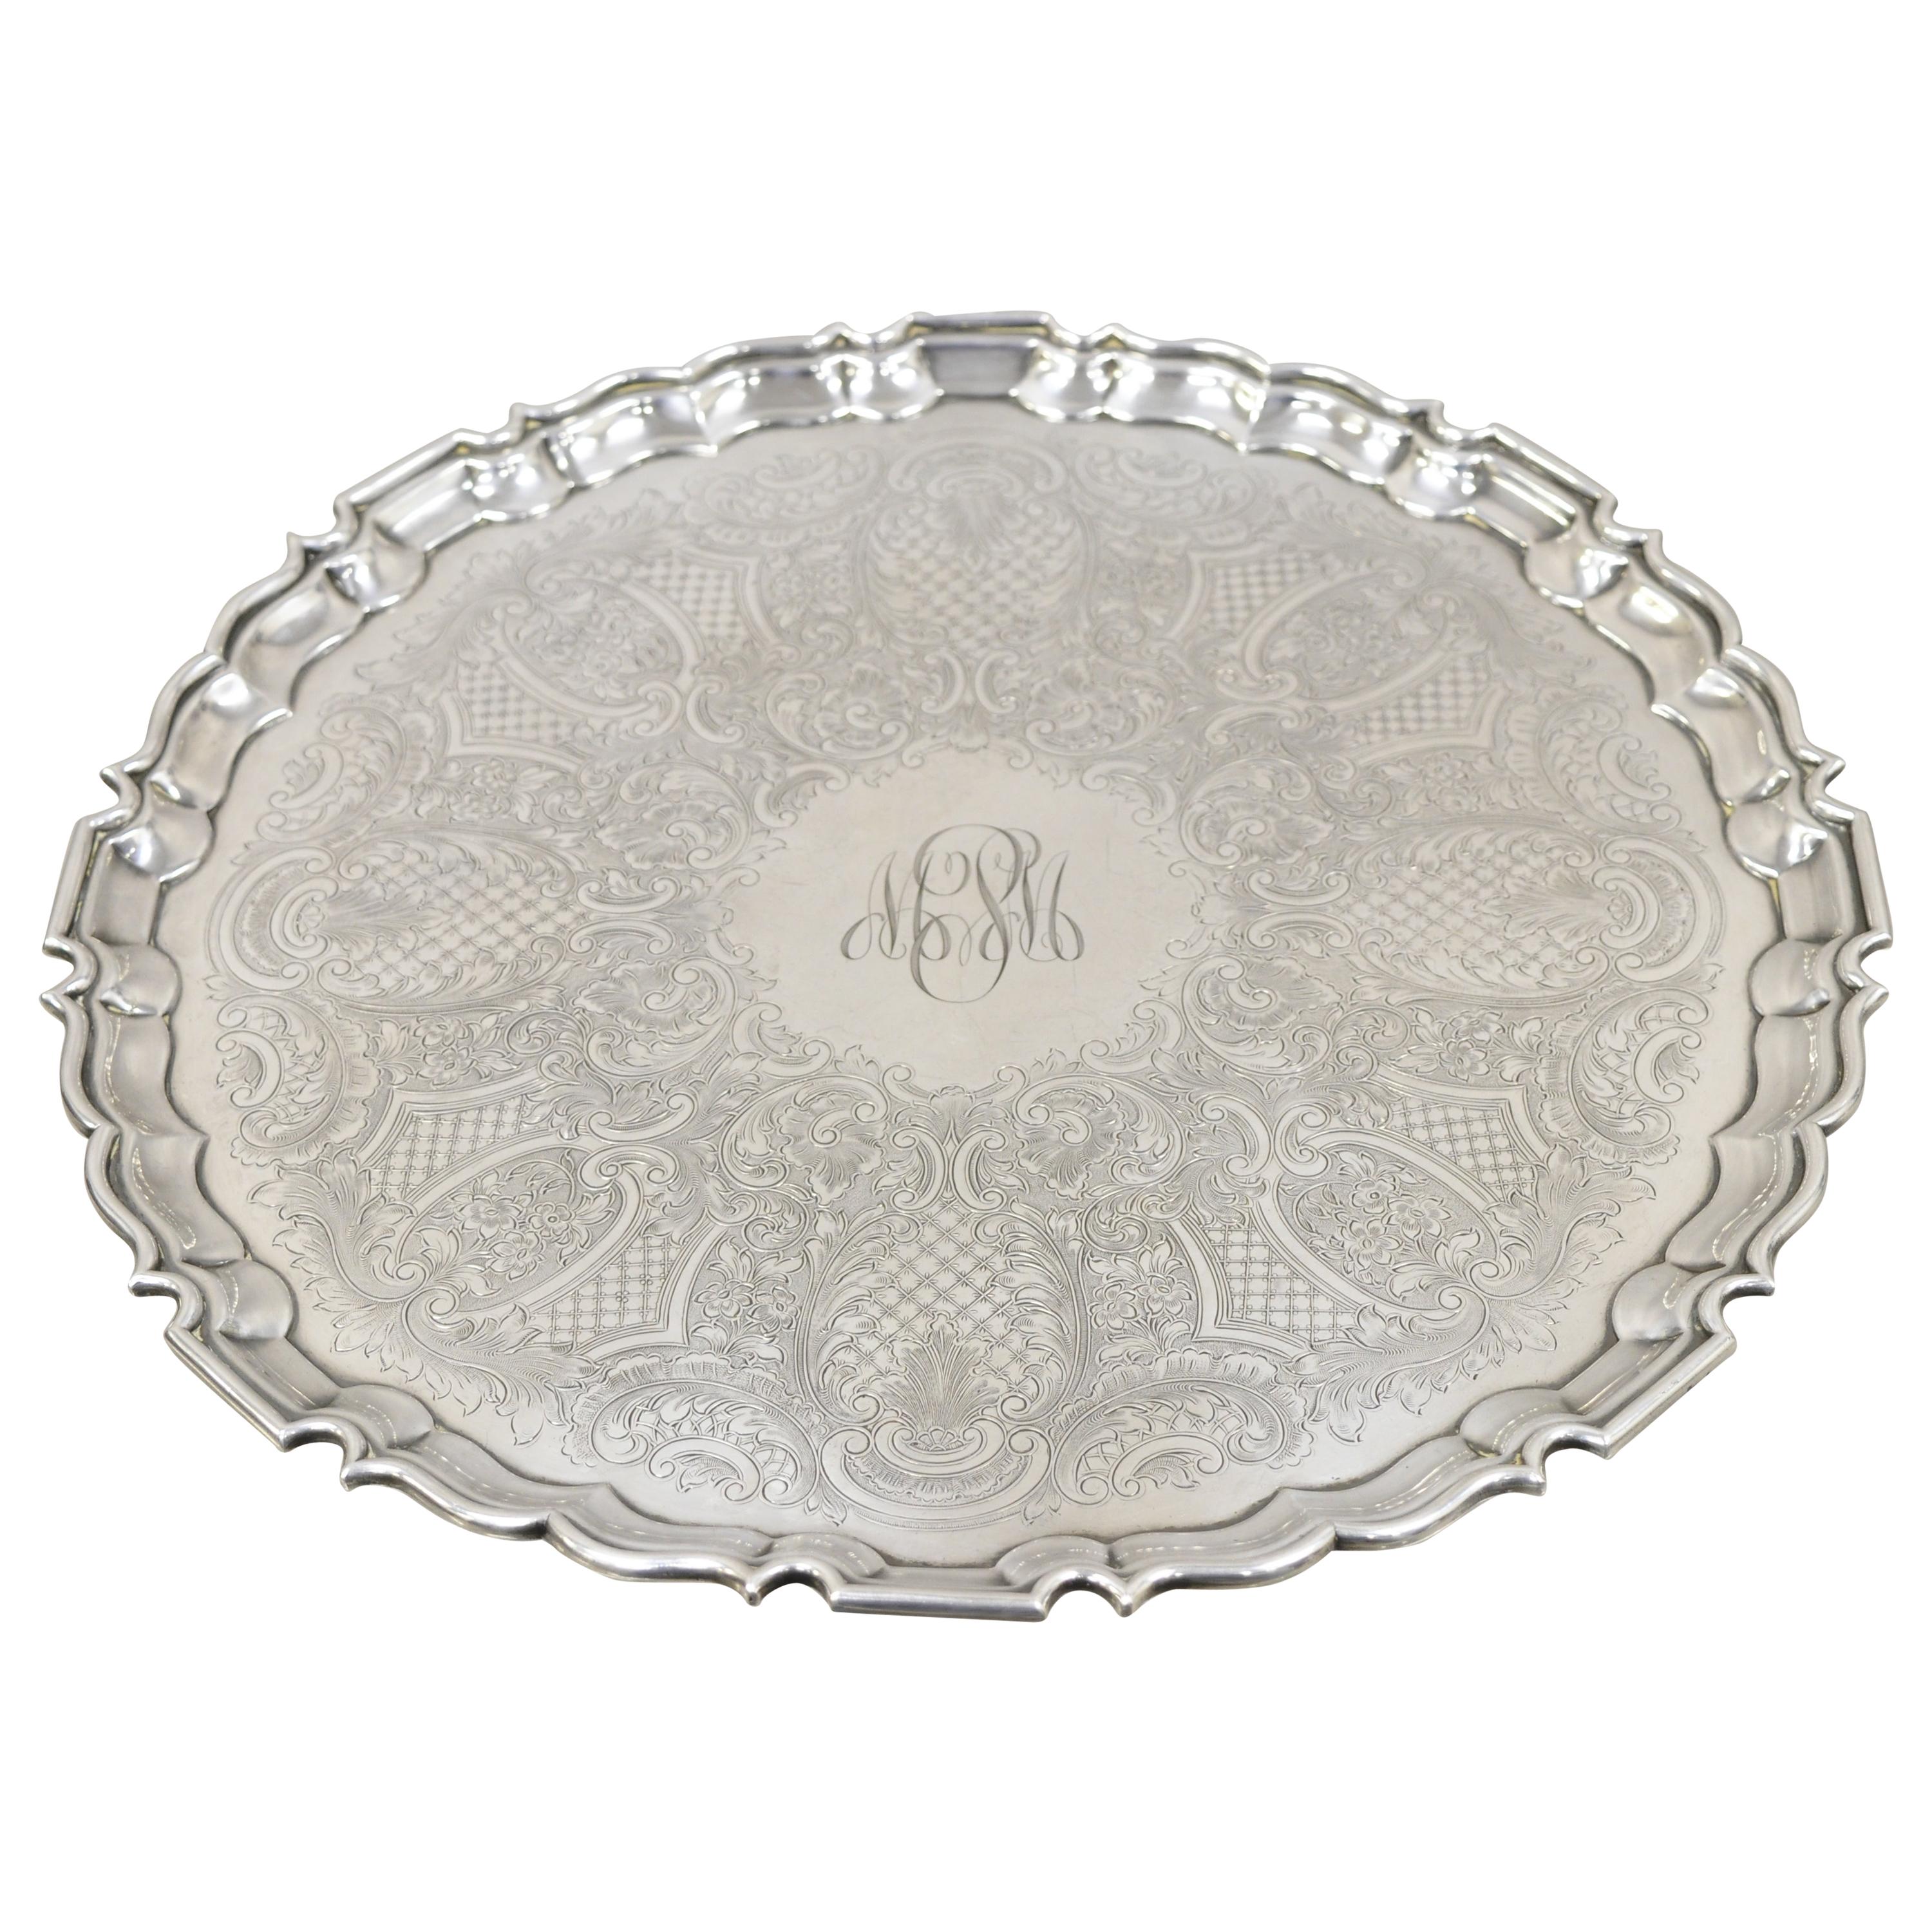 Antique Regency Silver Plate Scalloped Edge Floral Scrollwork Platter Tray For Sale